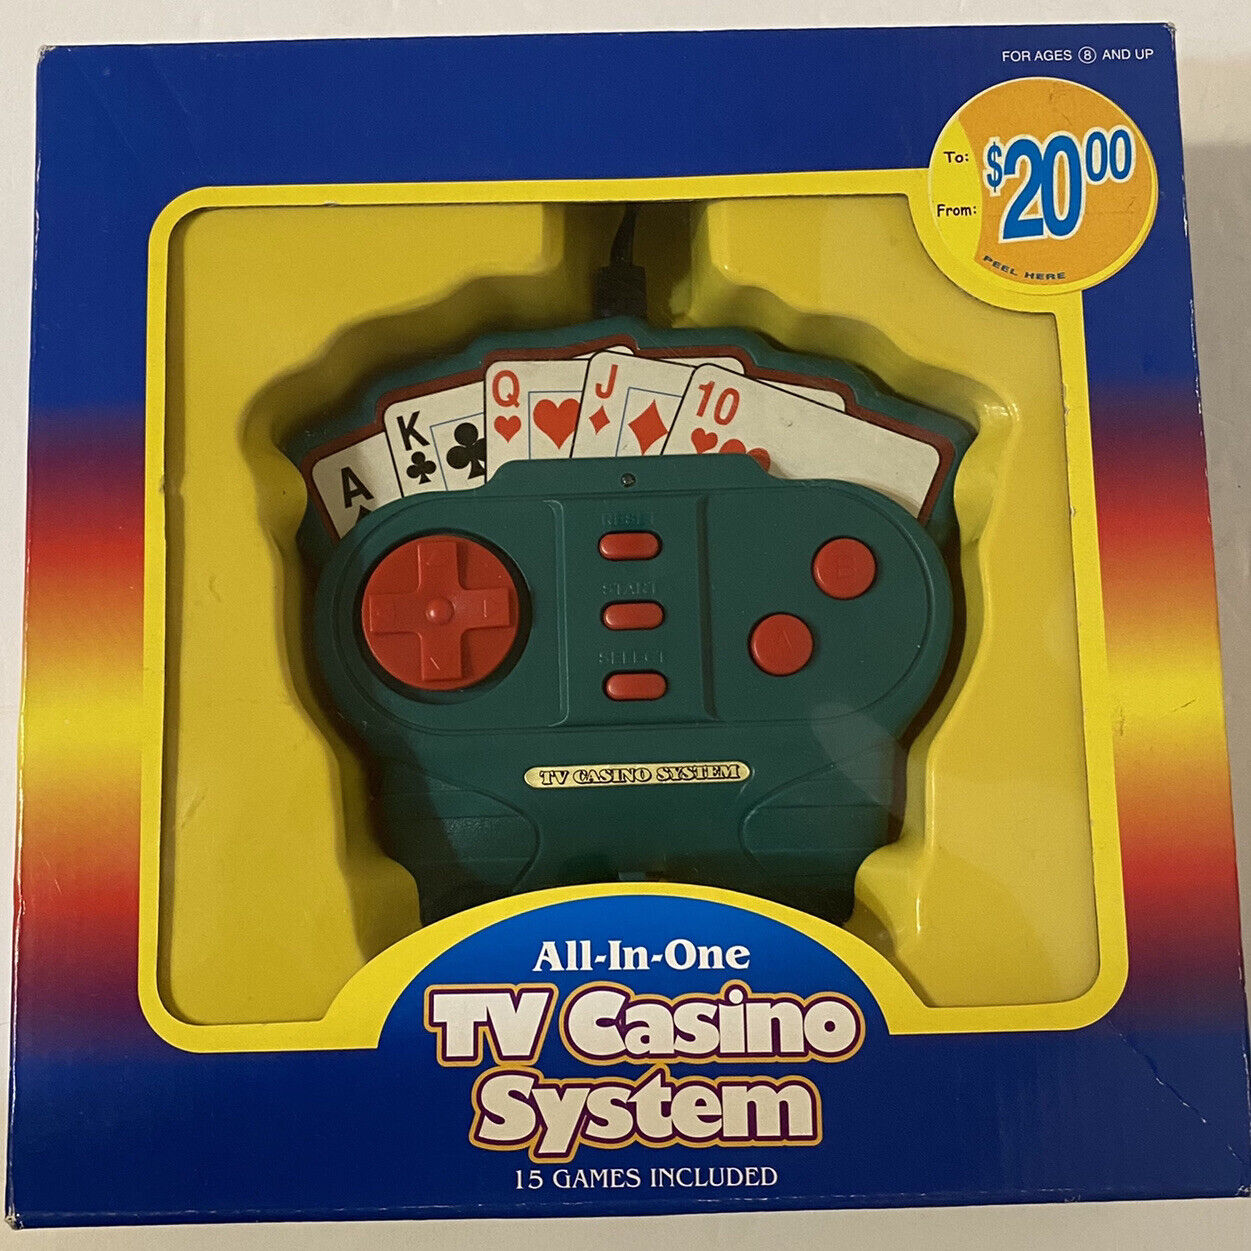 Techno Source All-in-One TV Casino System Plug-in-Play TV Game 15 Games New